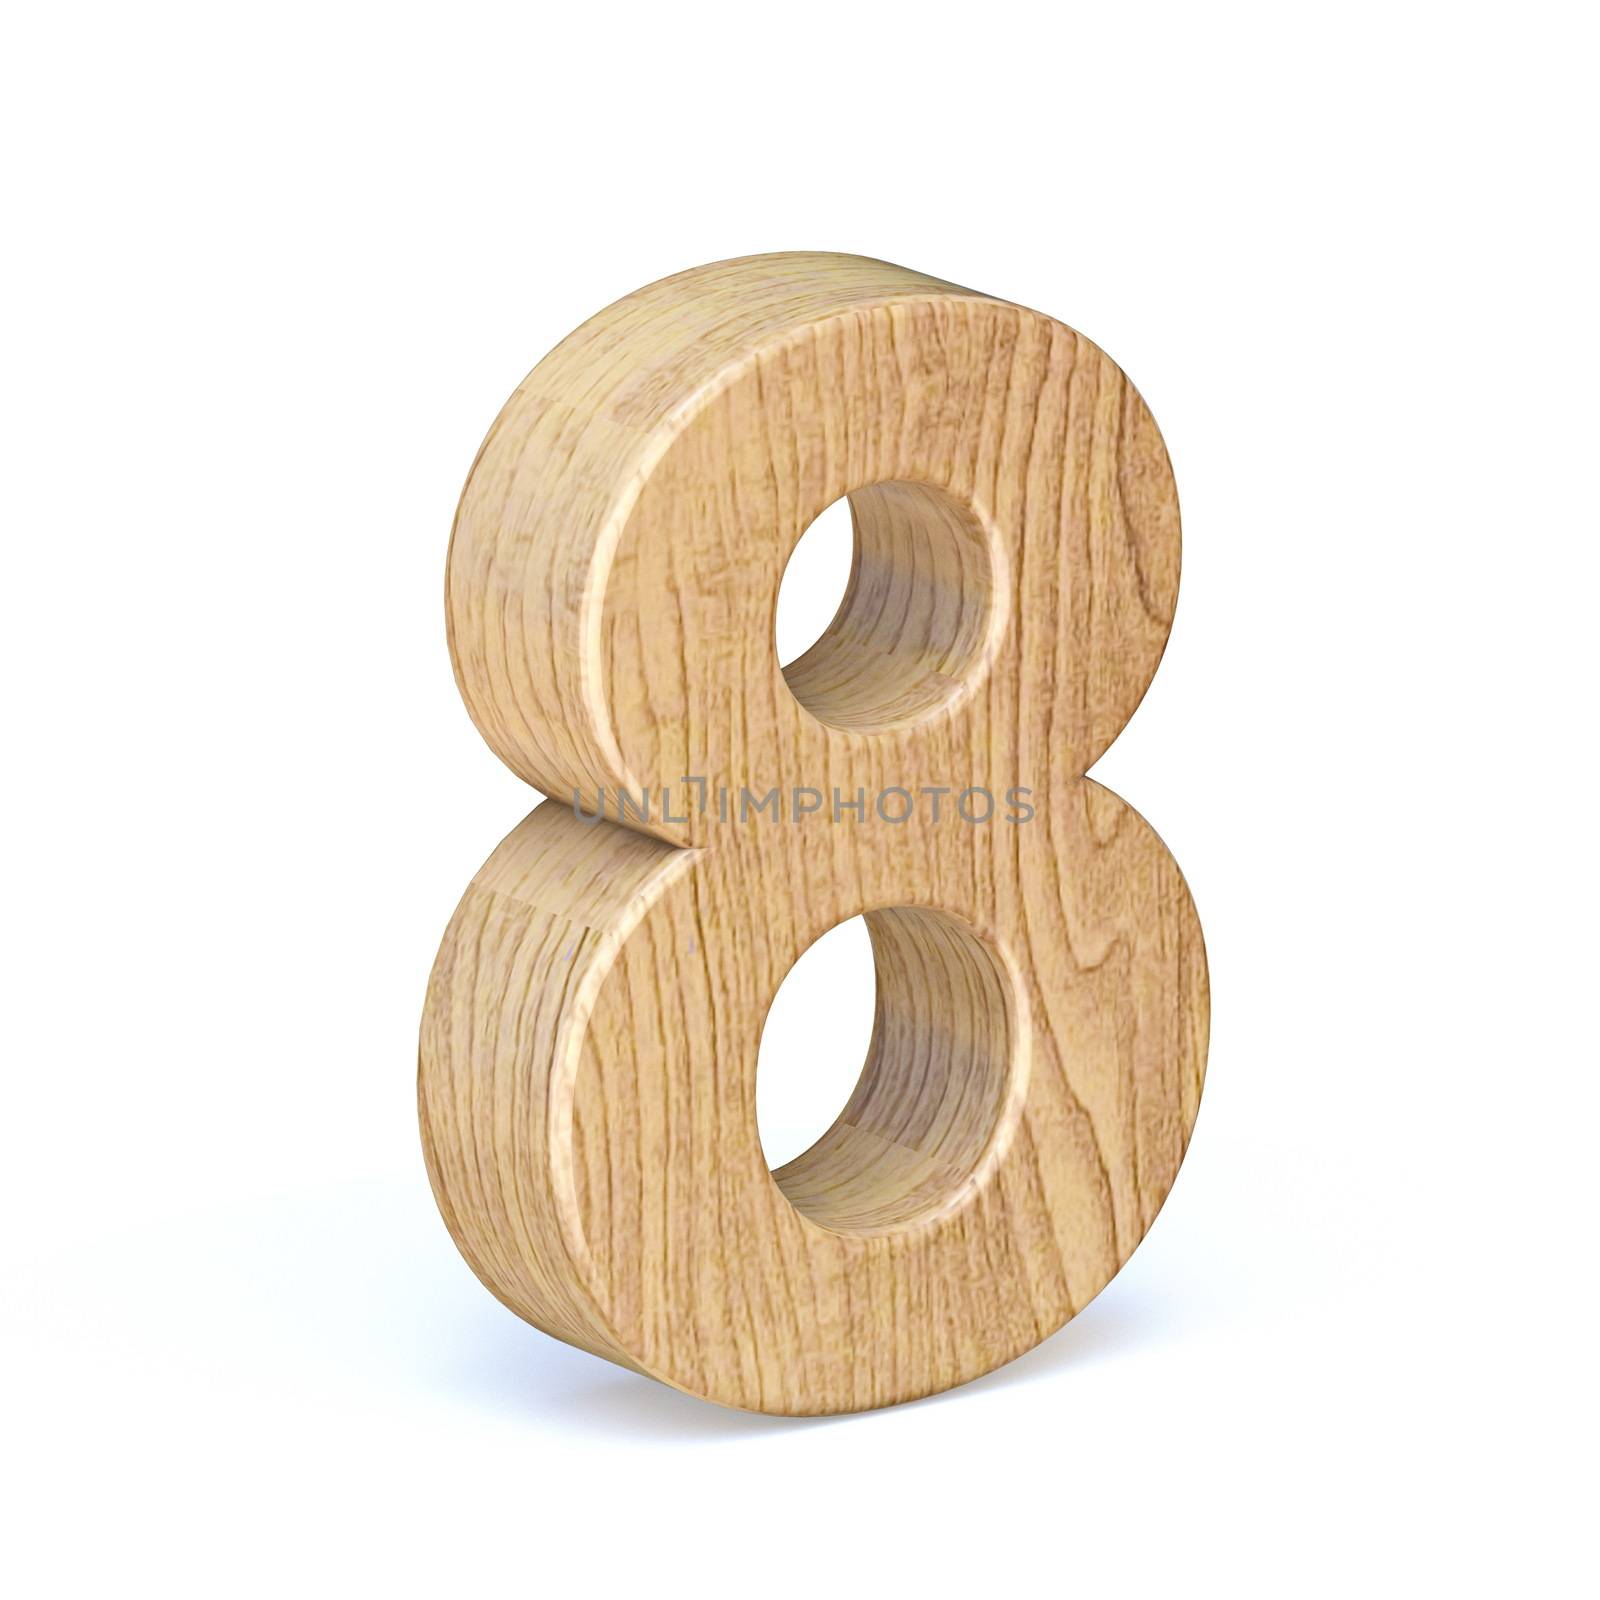 Rounded wooden font Number 8 EIGHT 3D render illustration isolated on white background